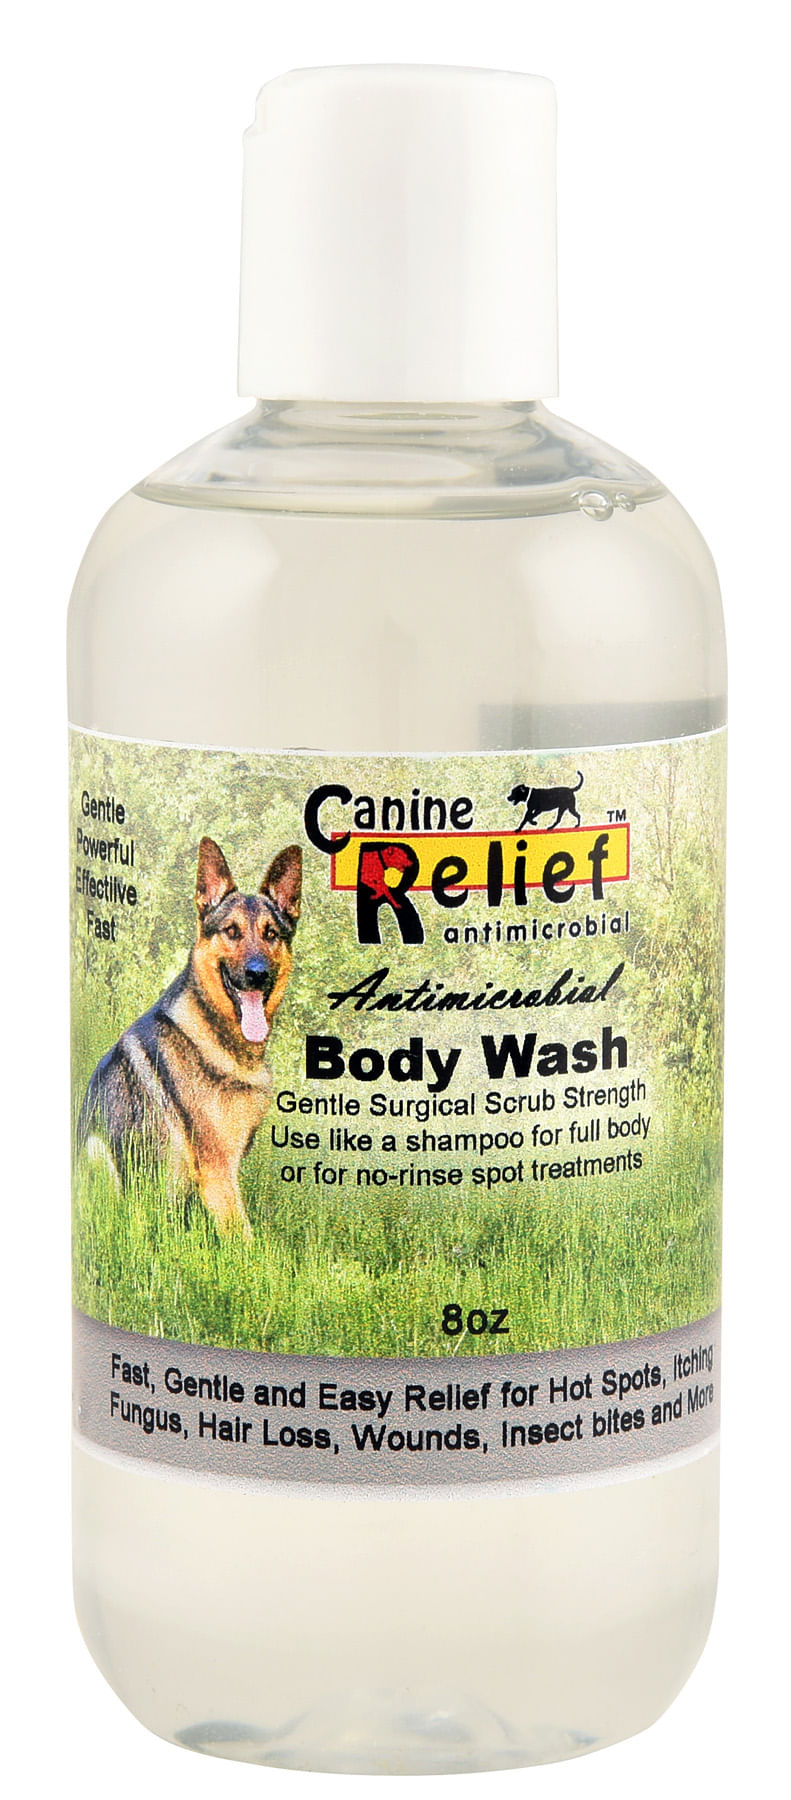 Canine-Relief-Antimicrobial-Body-Wash